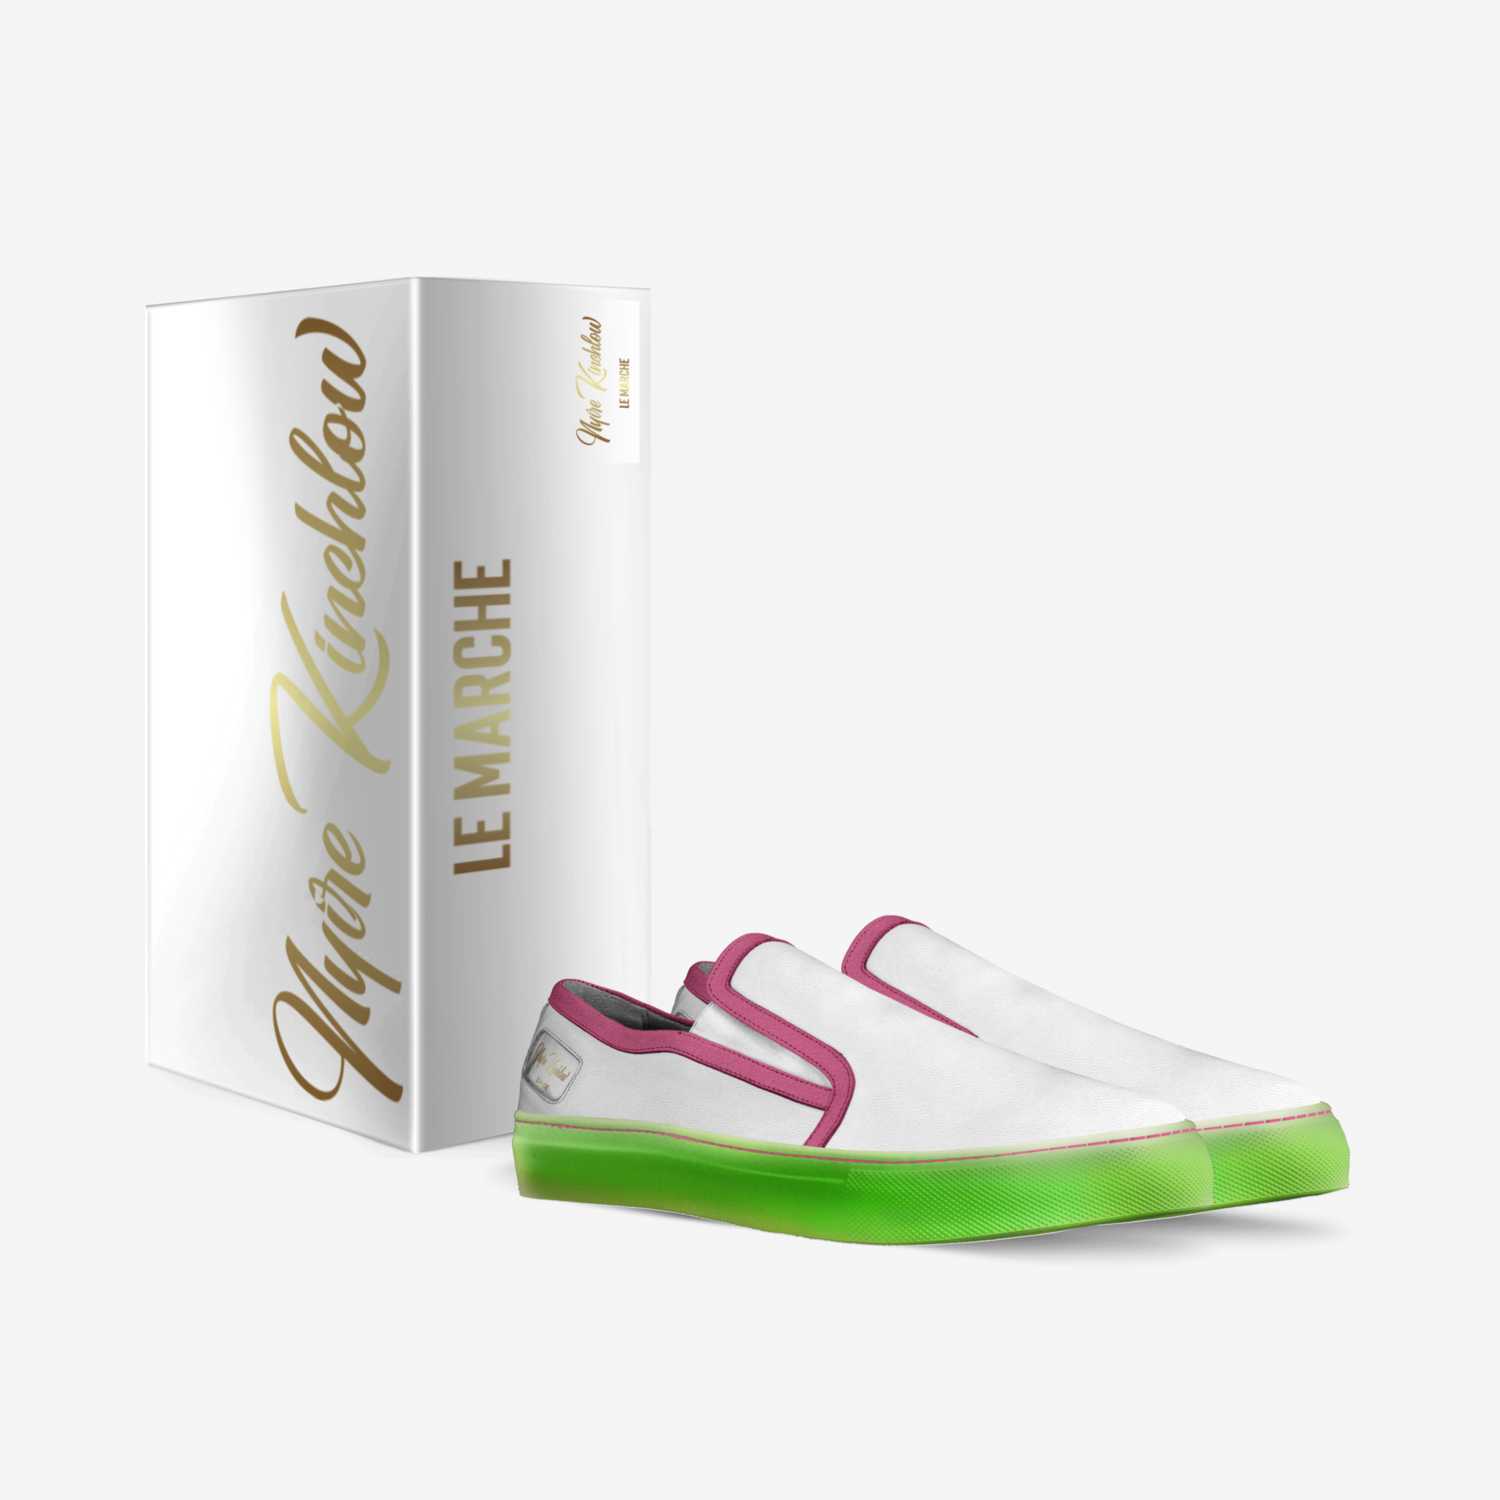 AMBITION WOMEN custom made in Italy shoes by Nyire Kinchlow | Box view